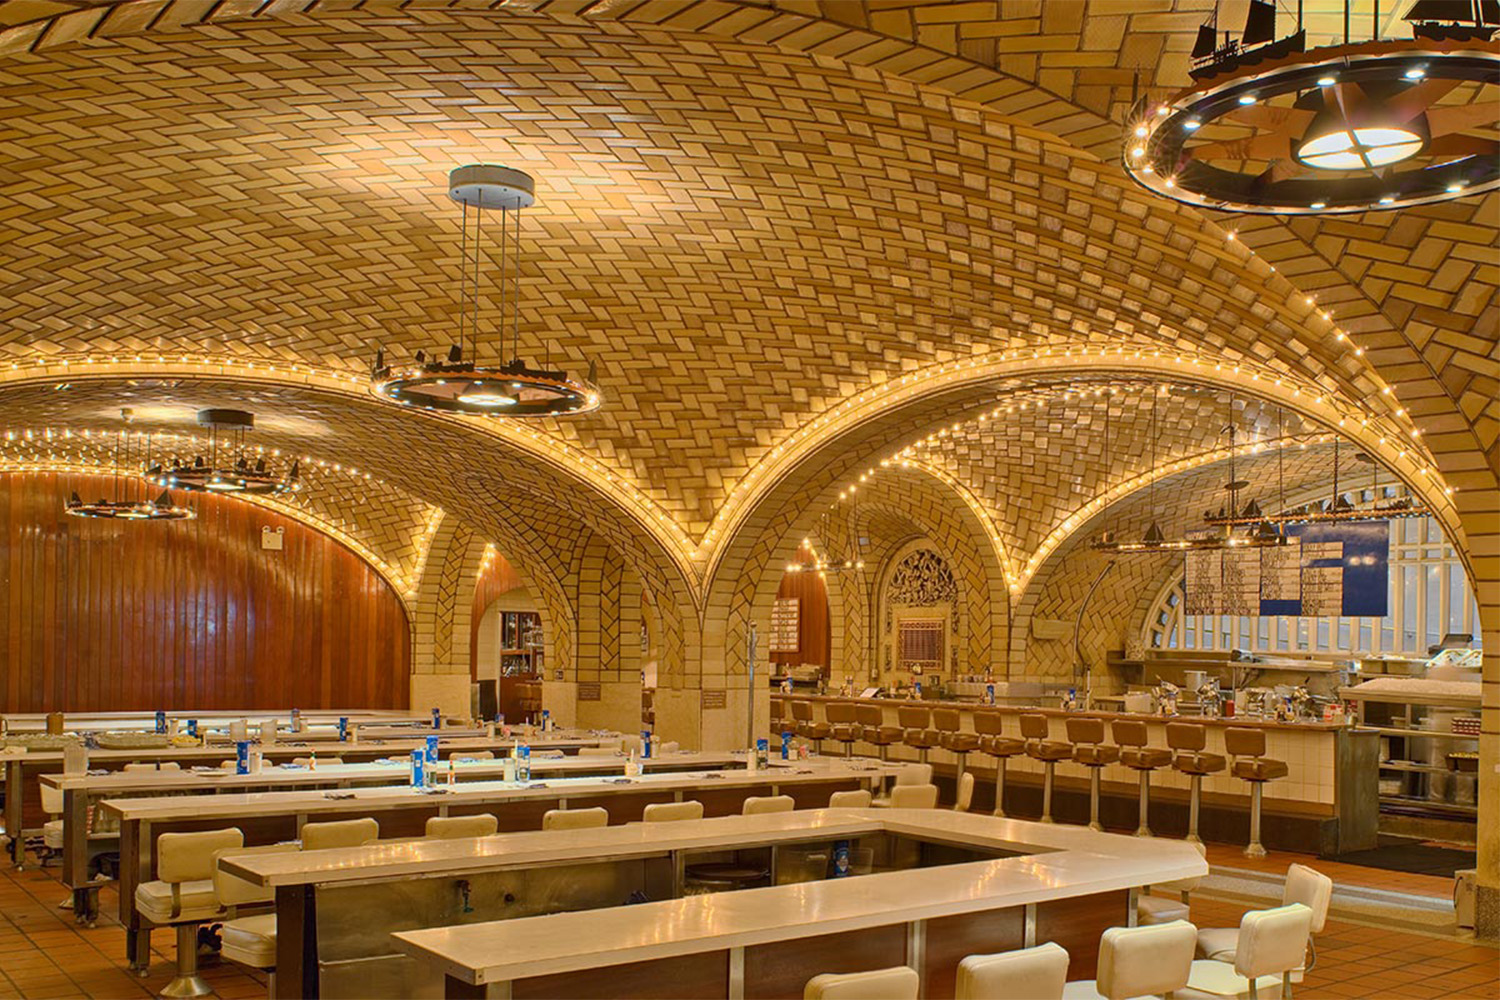 zoomed in view of ceiling at the Grand Central Oyster Bar + Restaurant in New York, NY